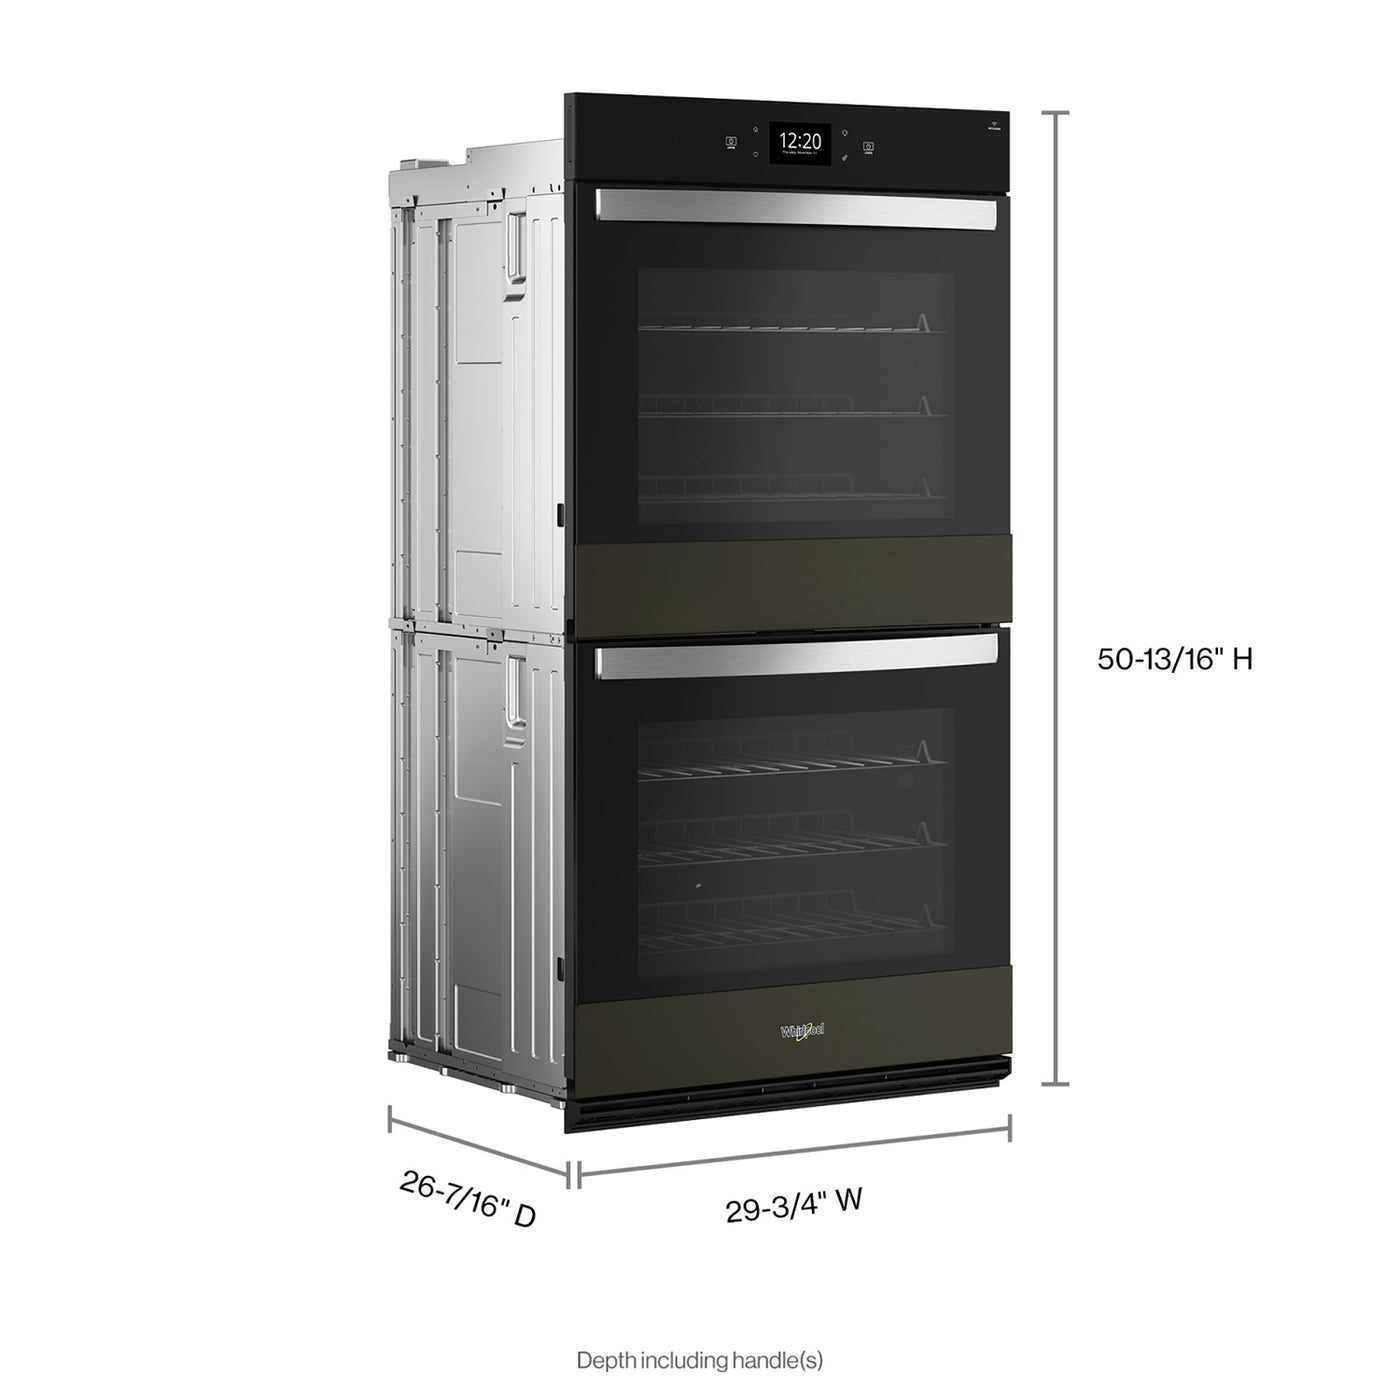 Whirlpool Black Stainless Steel Smart Double Wall Oven with PrintShield™ Finish (10.00 Cu Ft) - WOED7030PV